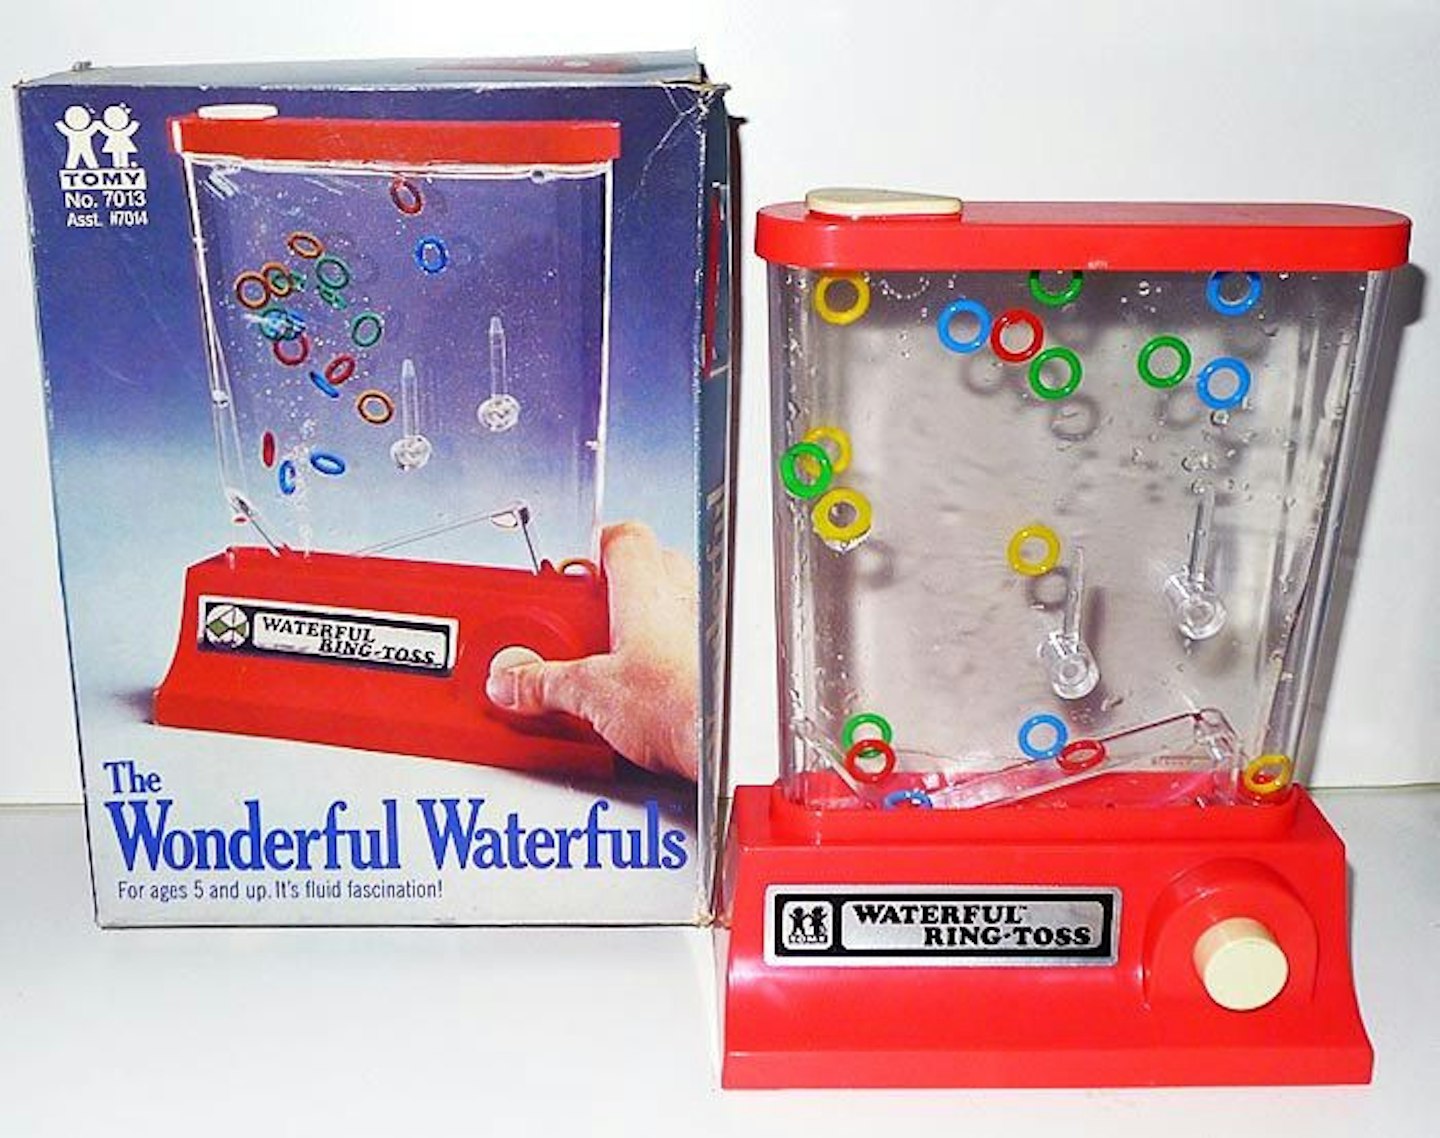 70s retro toys: Waterful ring toss